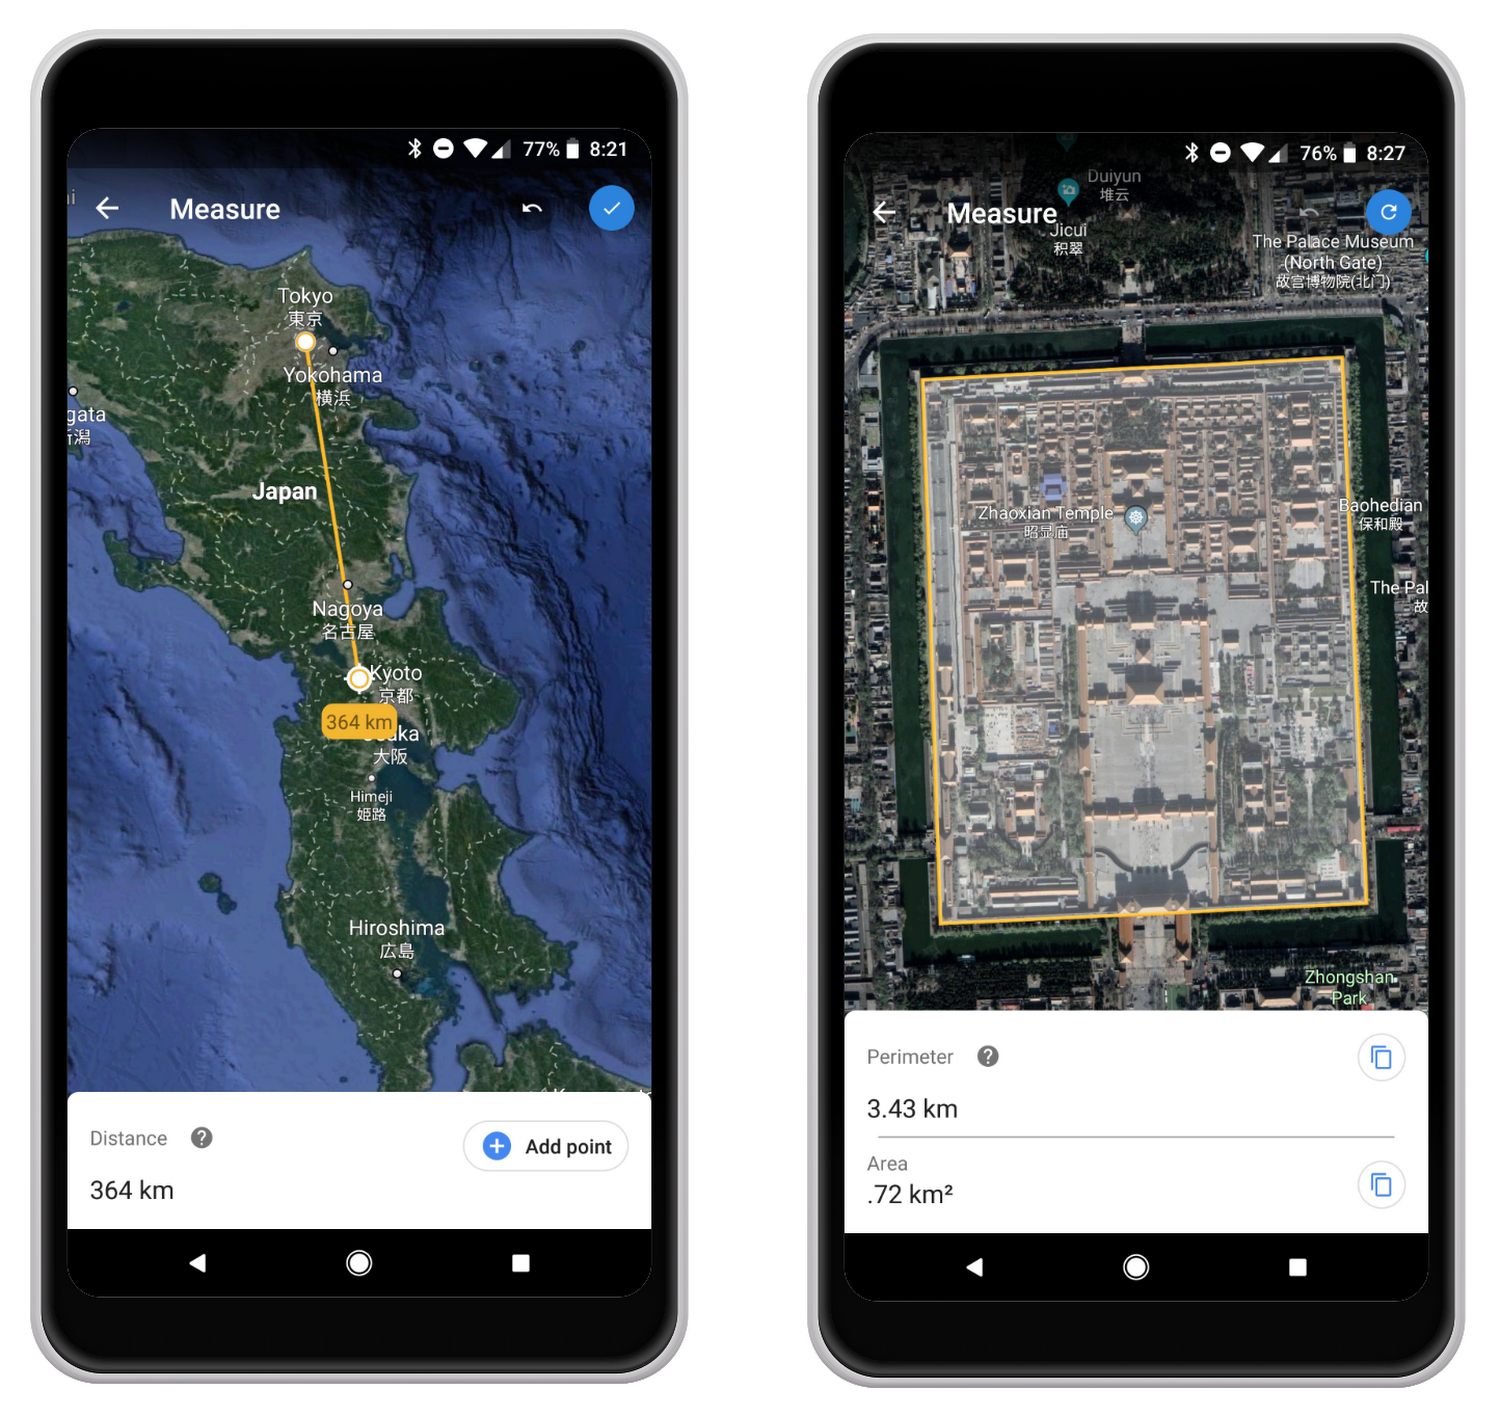 Introducing the Measure Tool for Google Earth on Chrome and Android